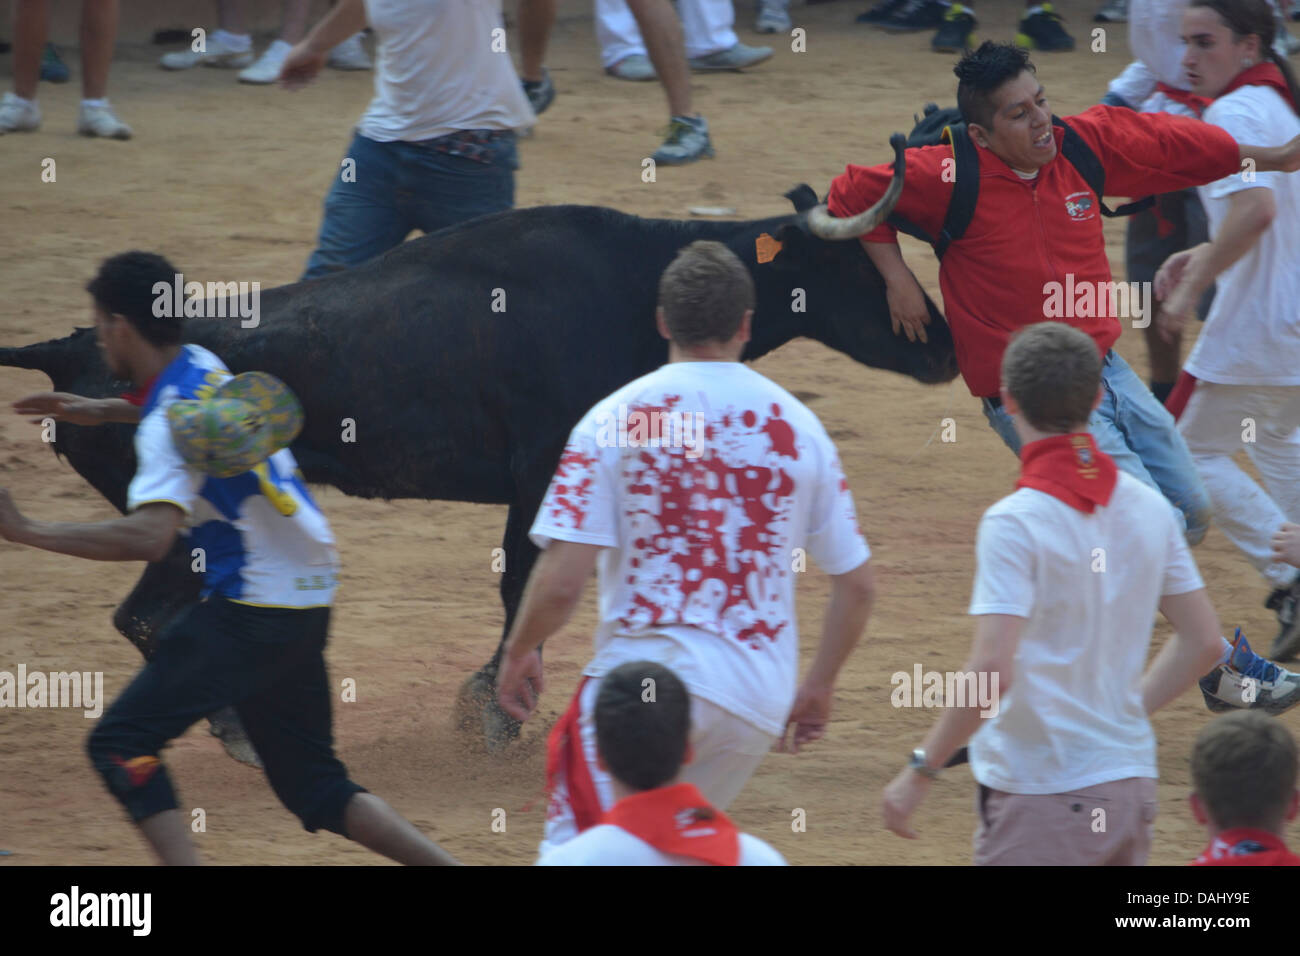 Crowds of people confronting a bull at the annual San Fermin festival in Pamplona, Spain Stock Photo